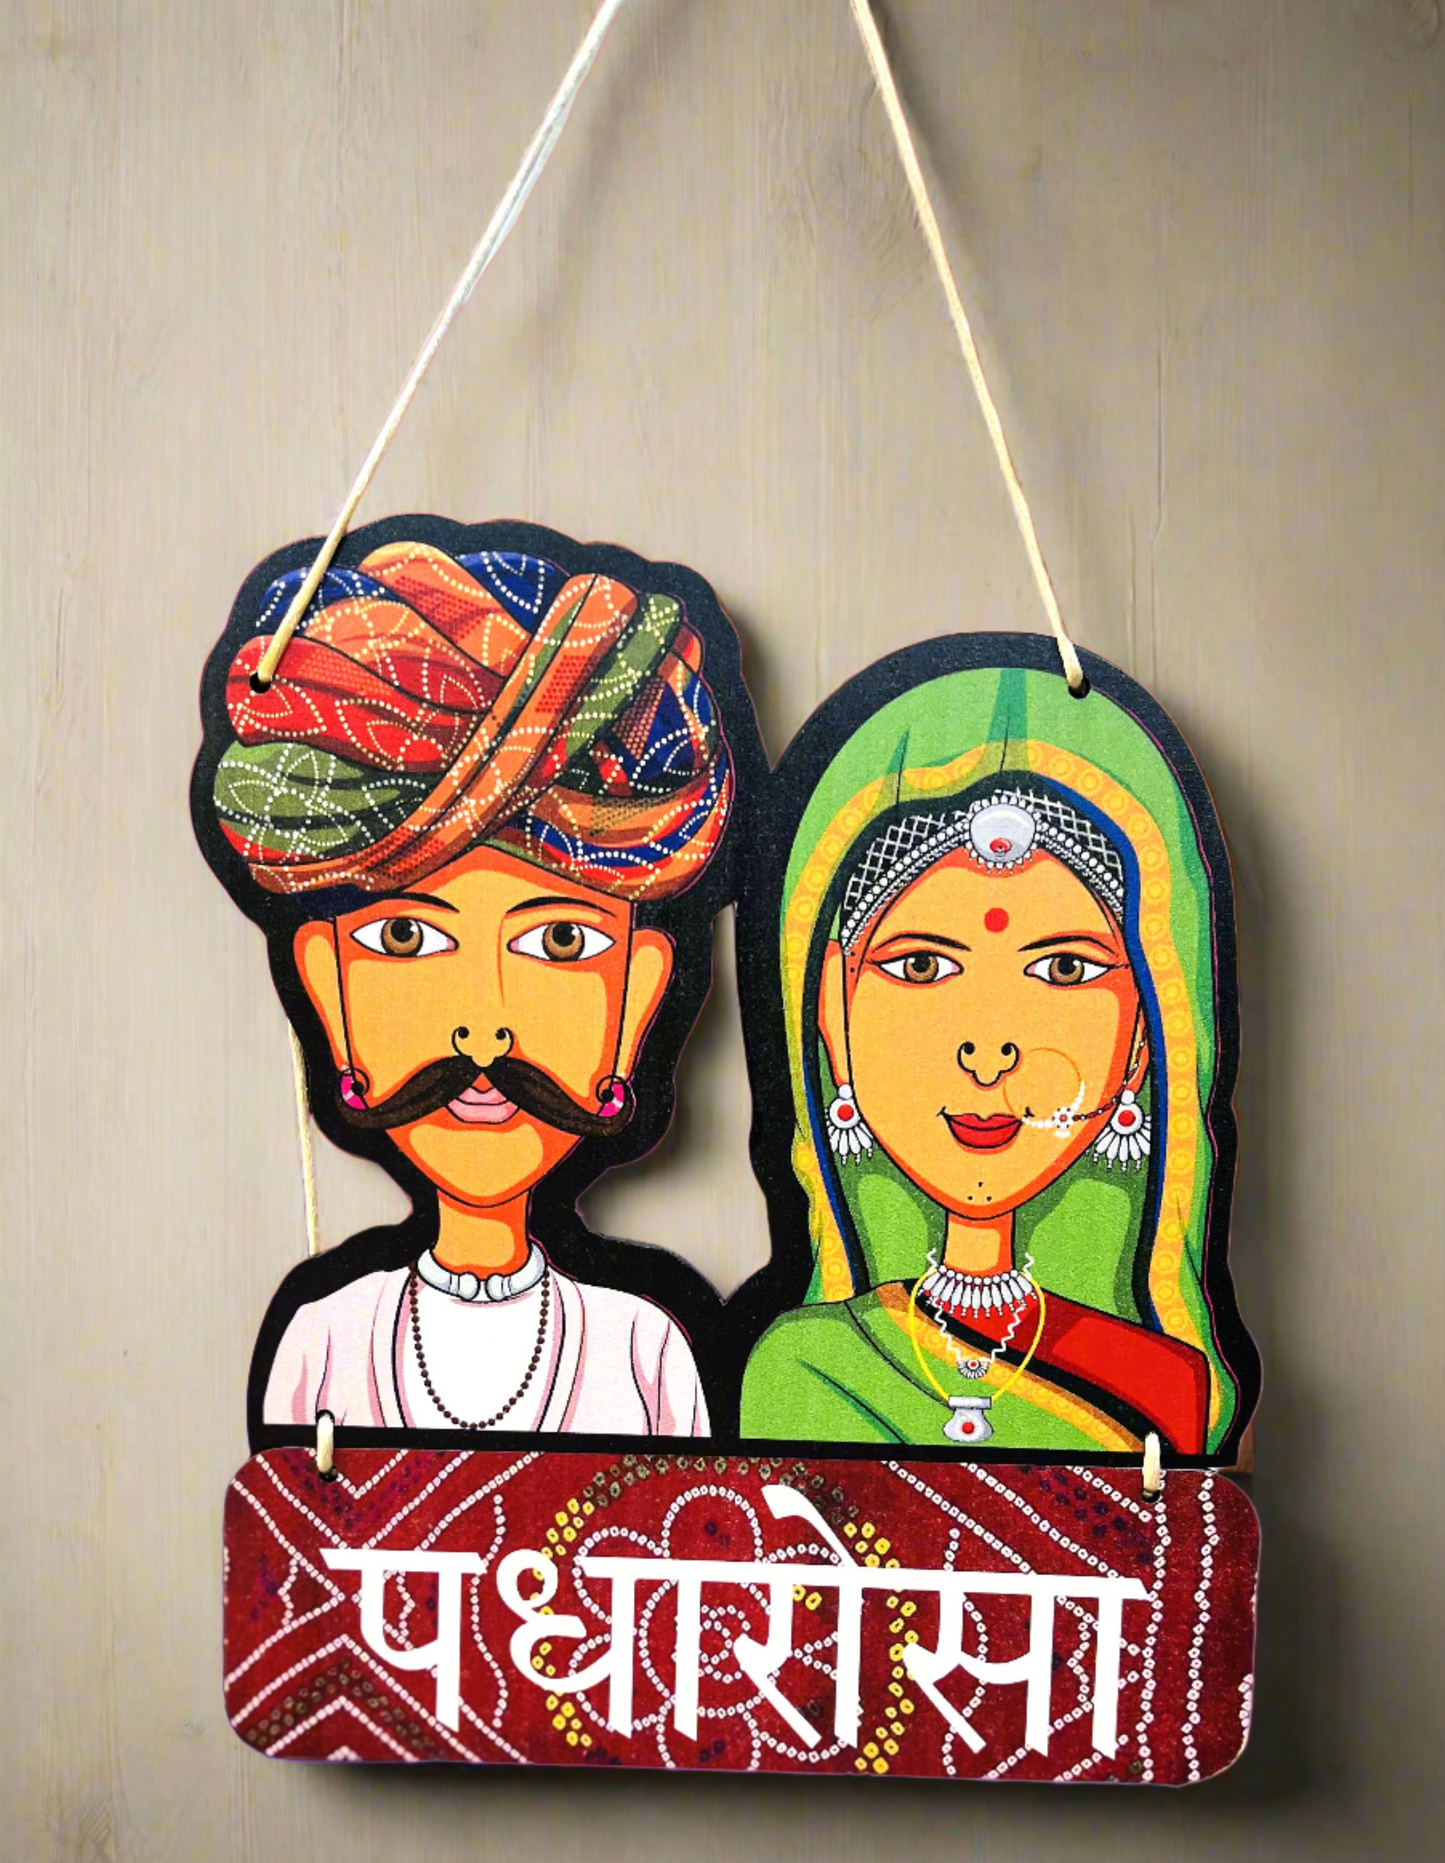 Handmade Wooden Door/Wall Hanging For Home Decor And Gift